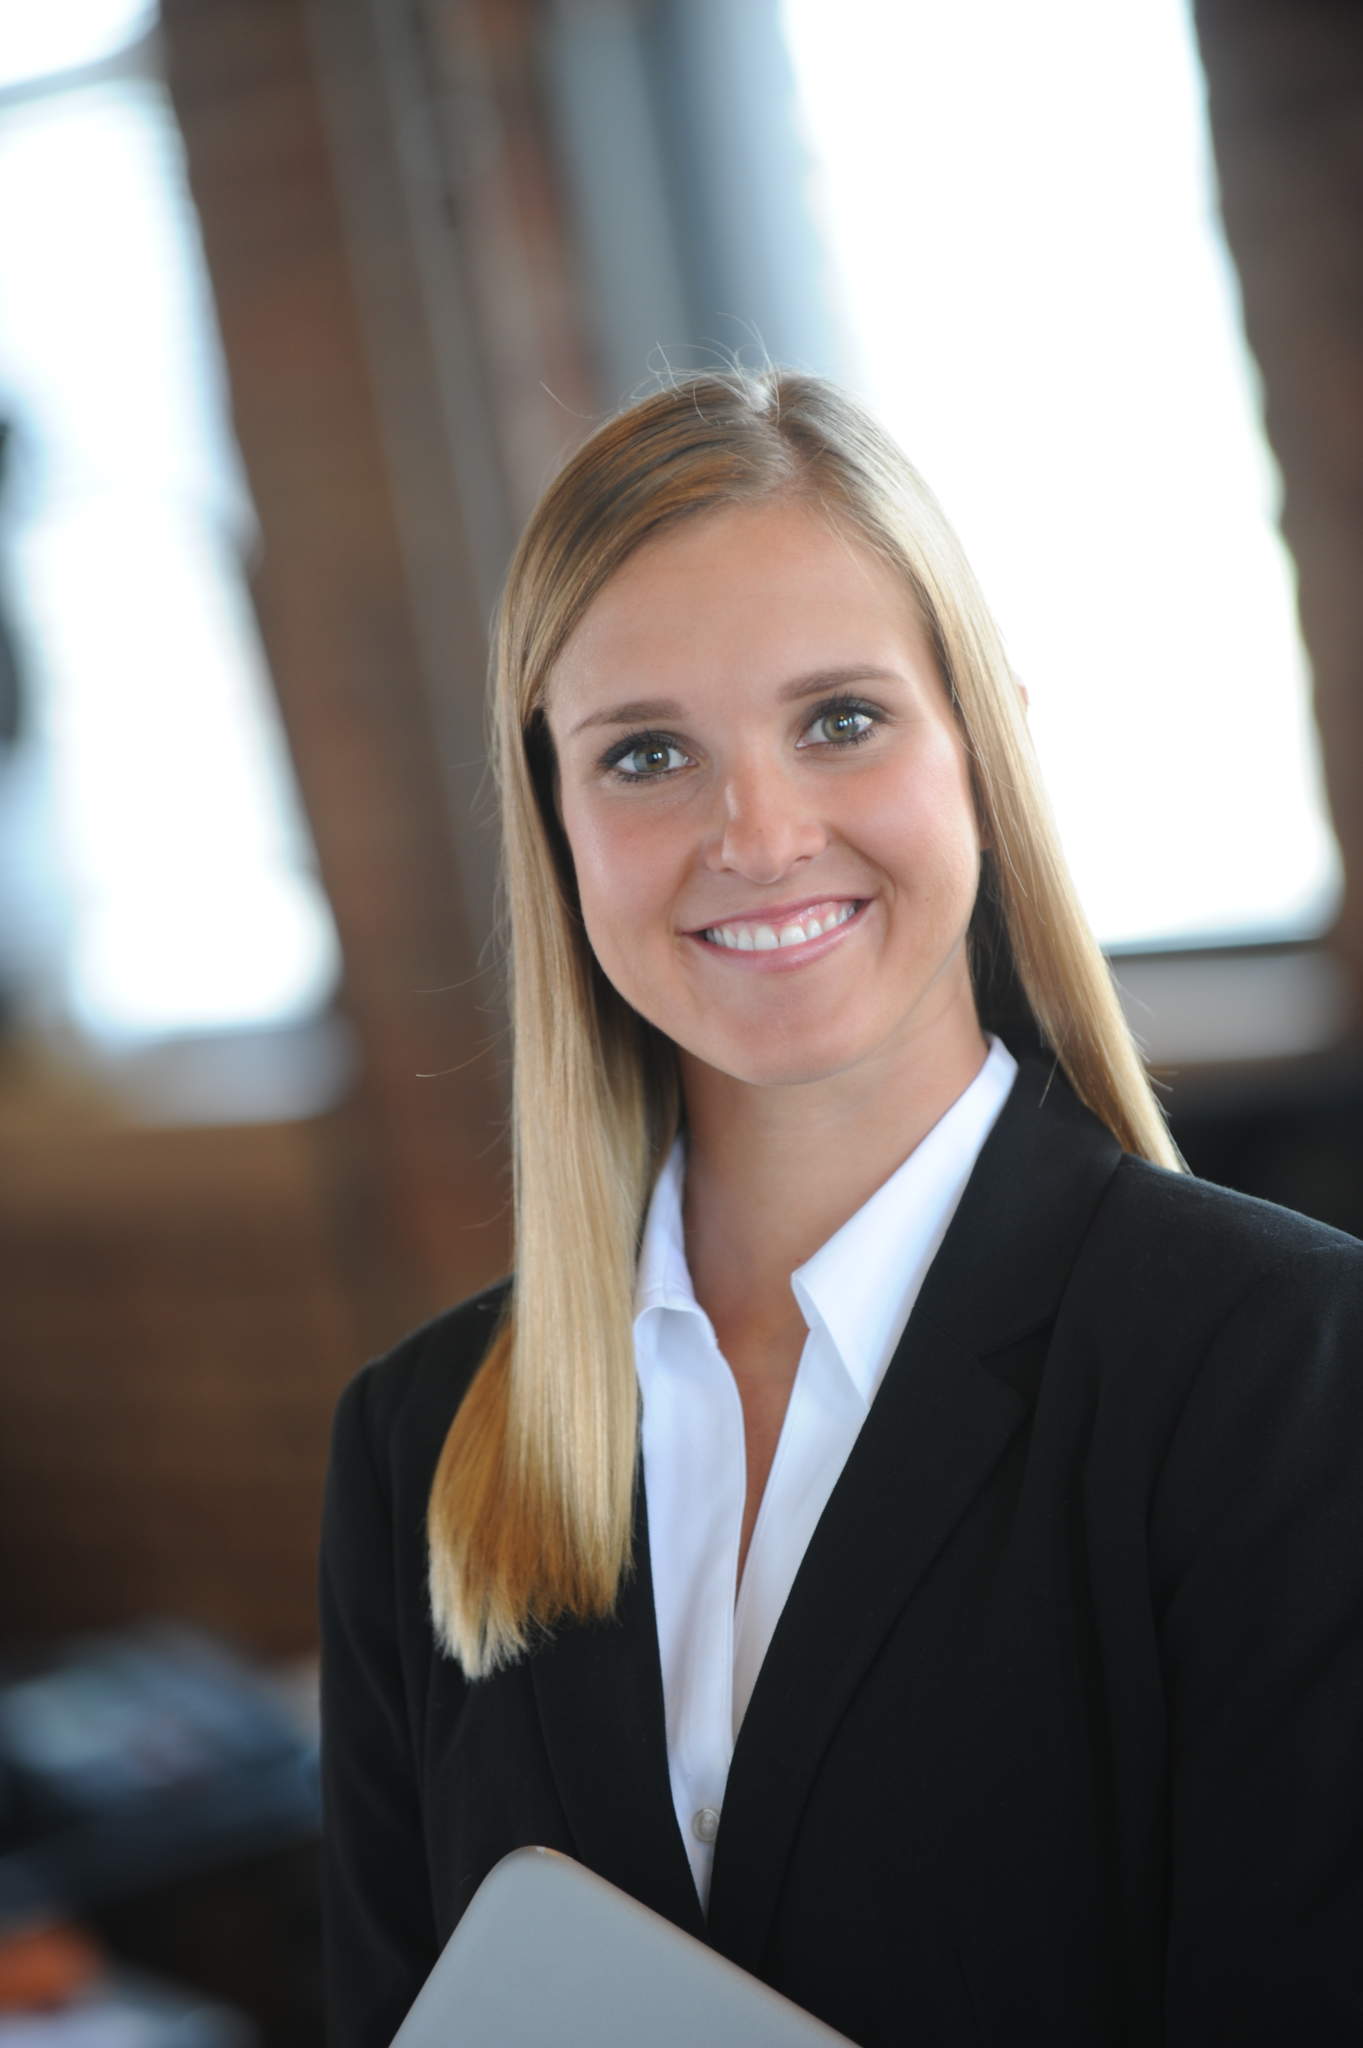 Rachel Barile Joins Fallston Group As Client Relations Coordinator